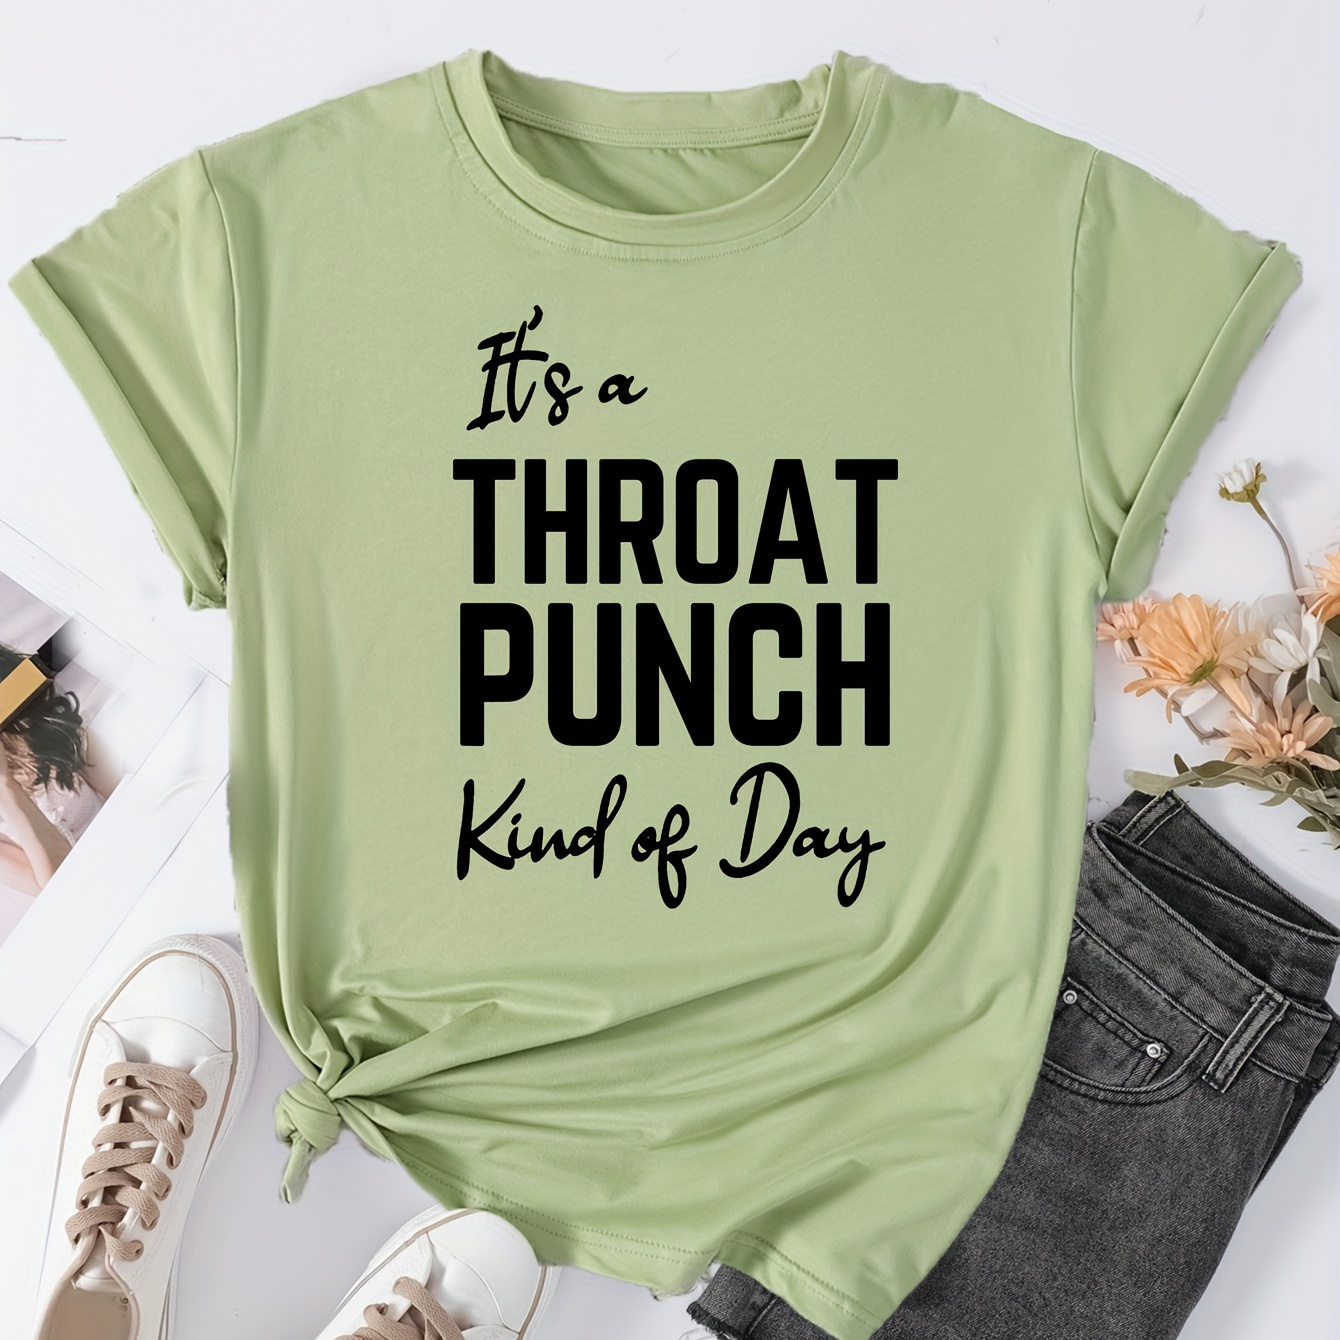 

Throat Punch Print T-shirt, Casual Short Sleeve Crew Neck Top For Spring & Summer, Women's Clothing